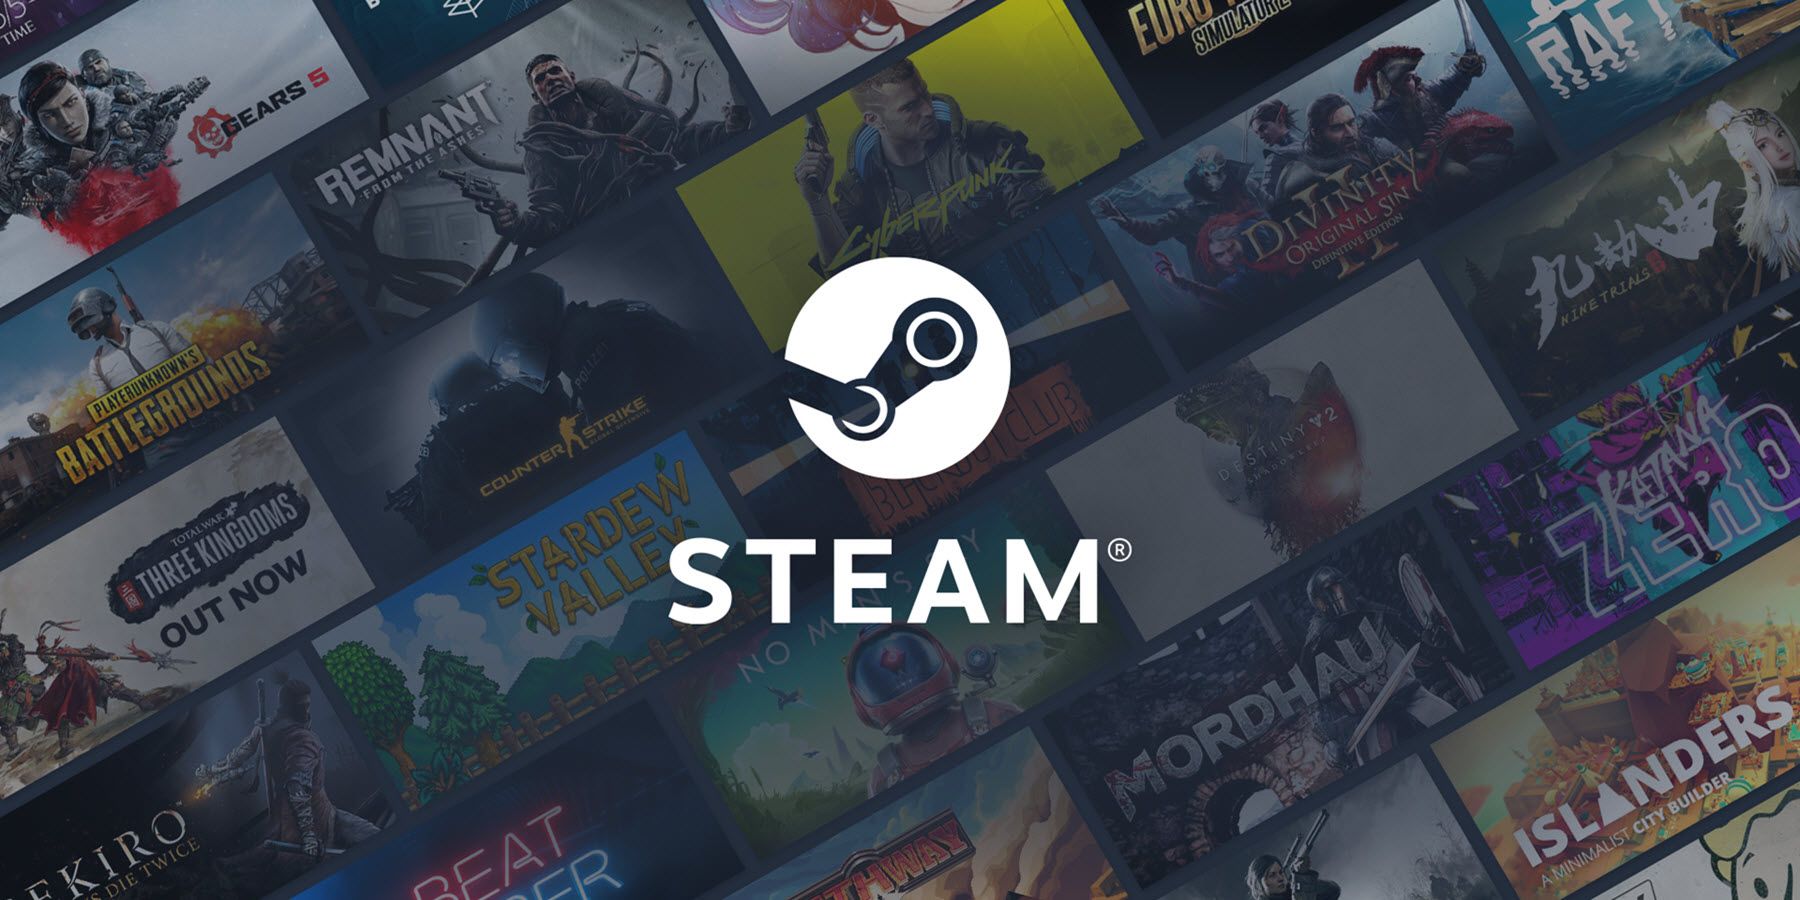 The Steam game gets a huge increase in concurrent players after adding multiplayer